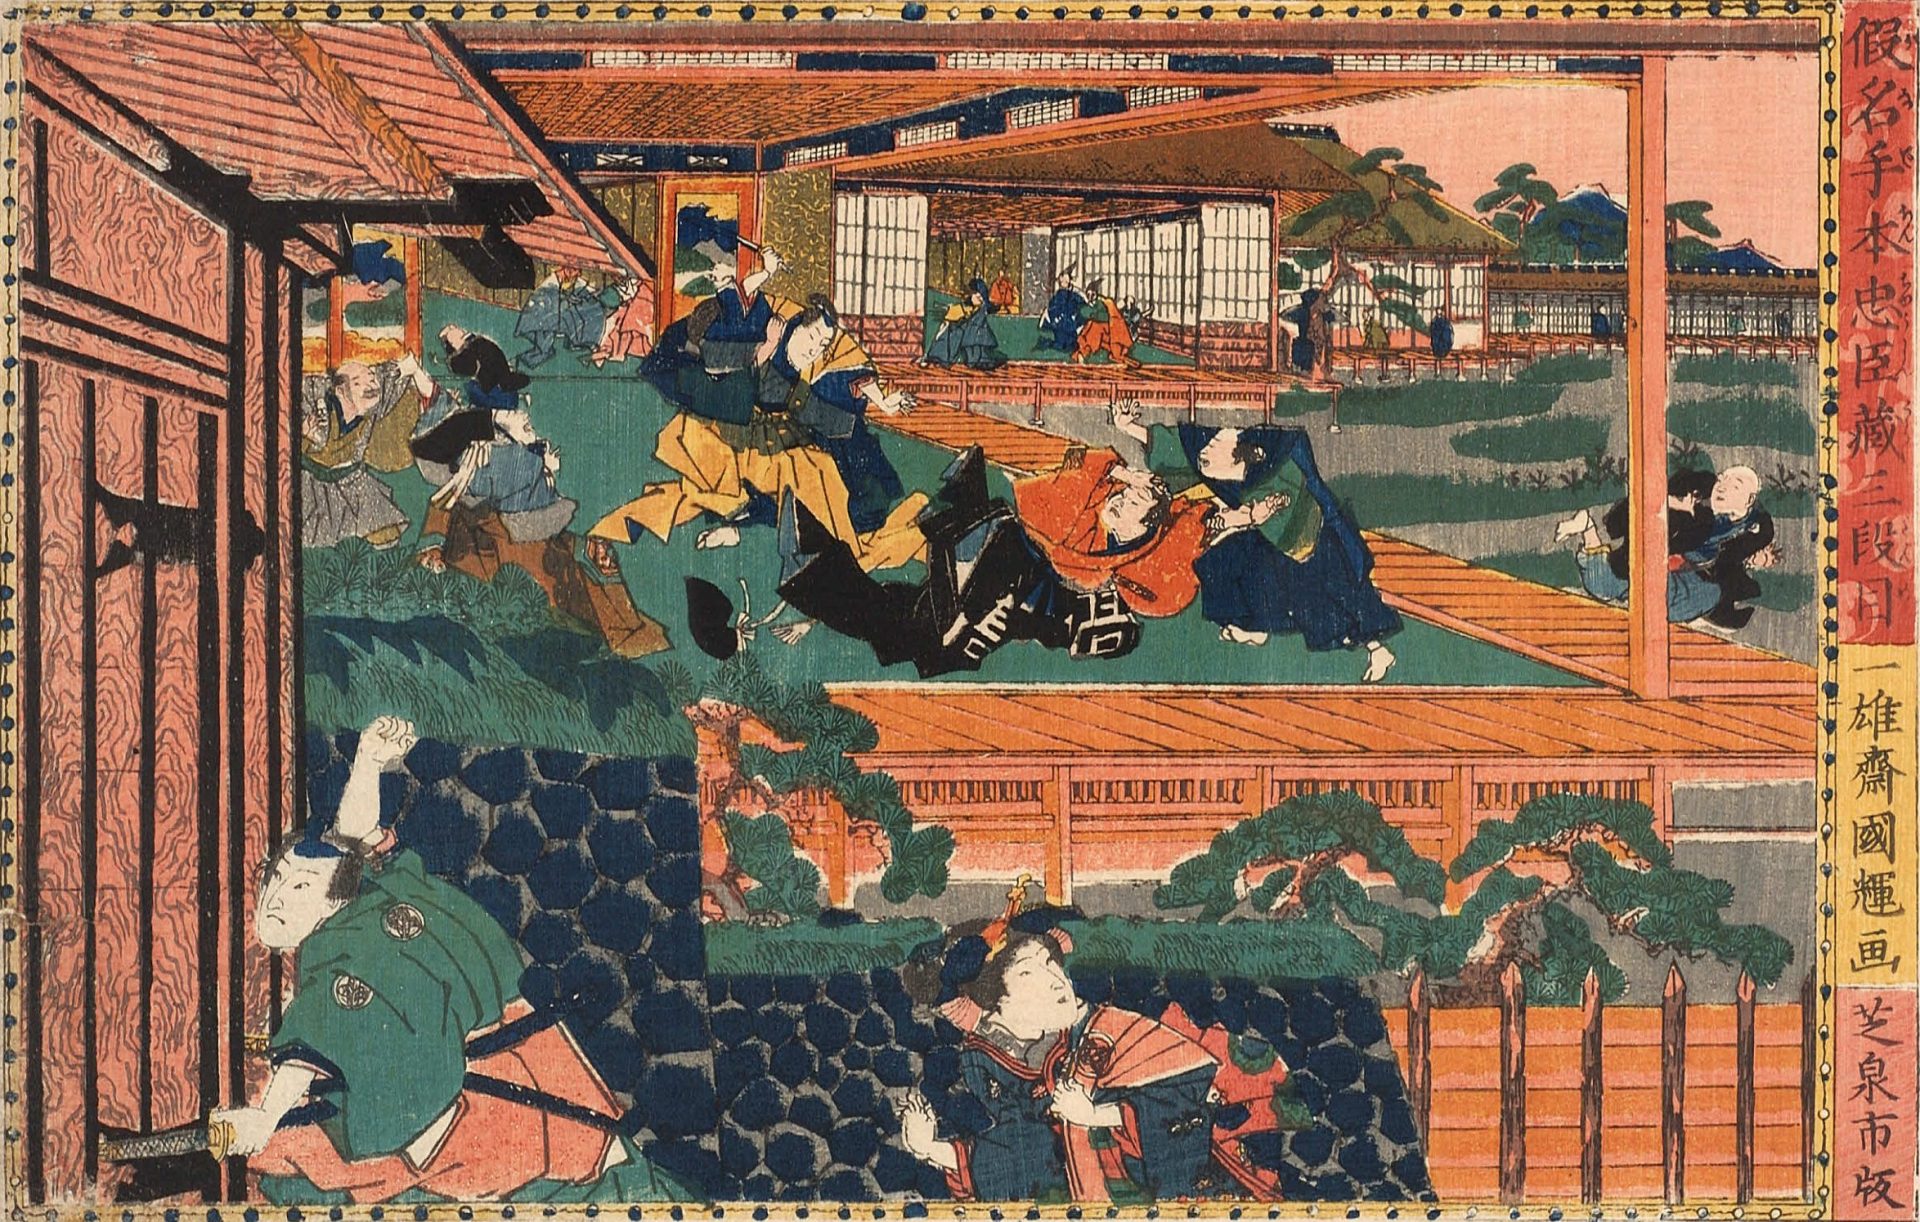 A Japanese illustration of a samurai attack on an official's homestead. The scene is chaotic with multiple people running around. The focal point depicts a samurai swinging a sword at the official.